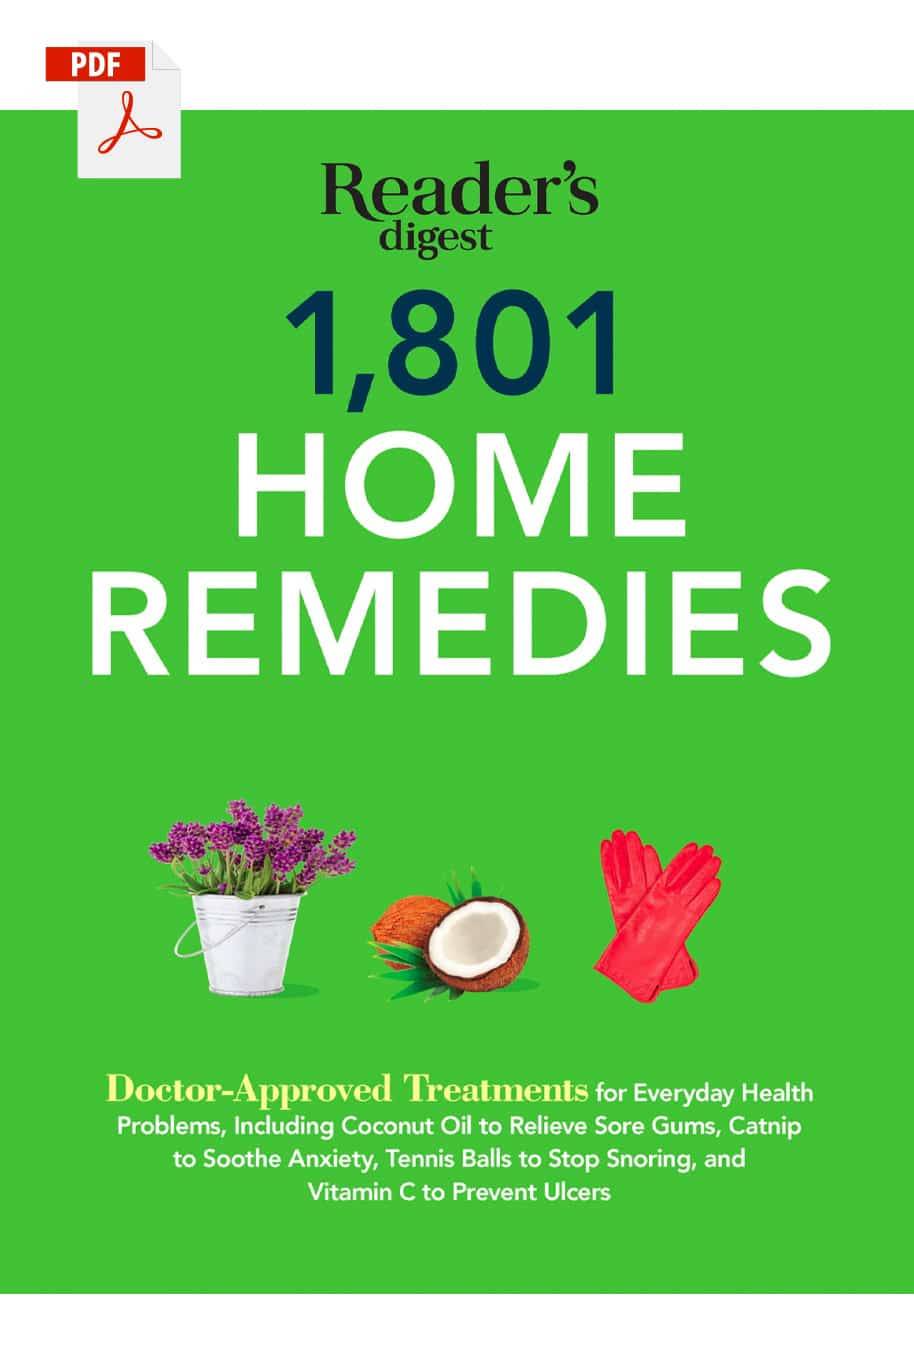 1801 Home Remedies - 643 pages